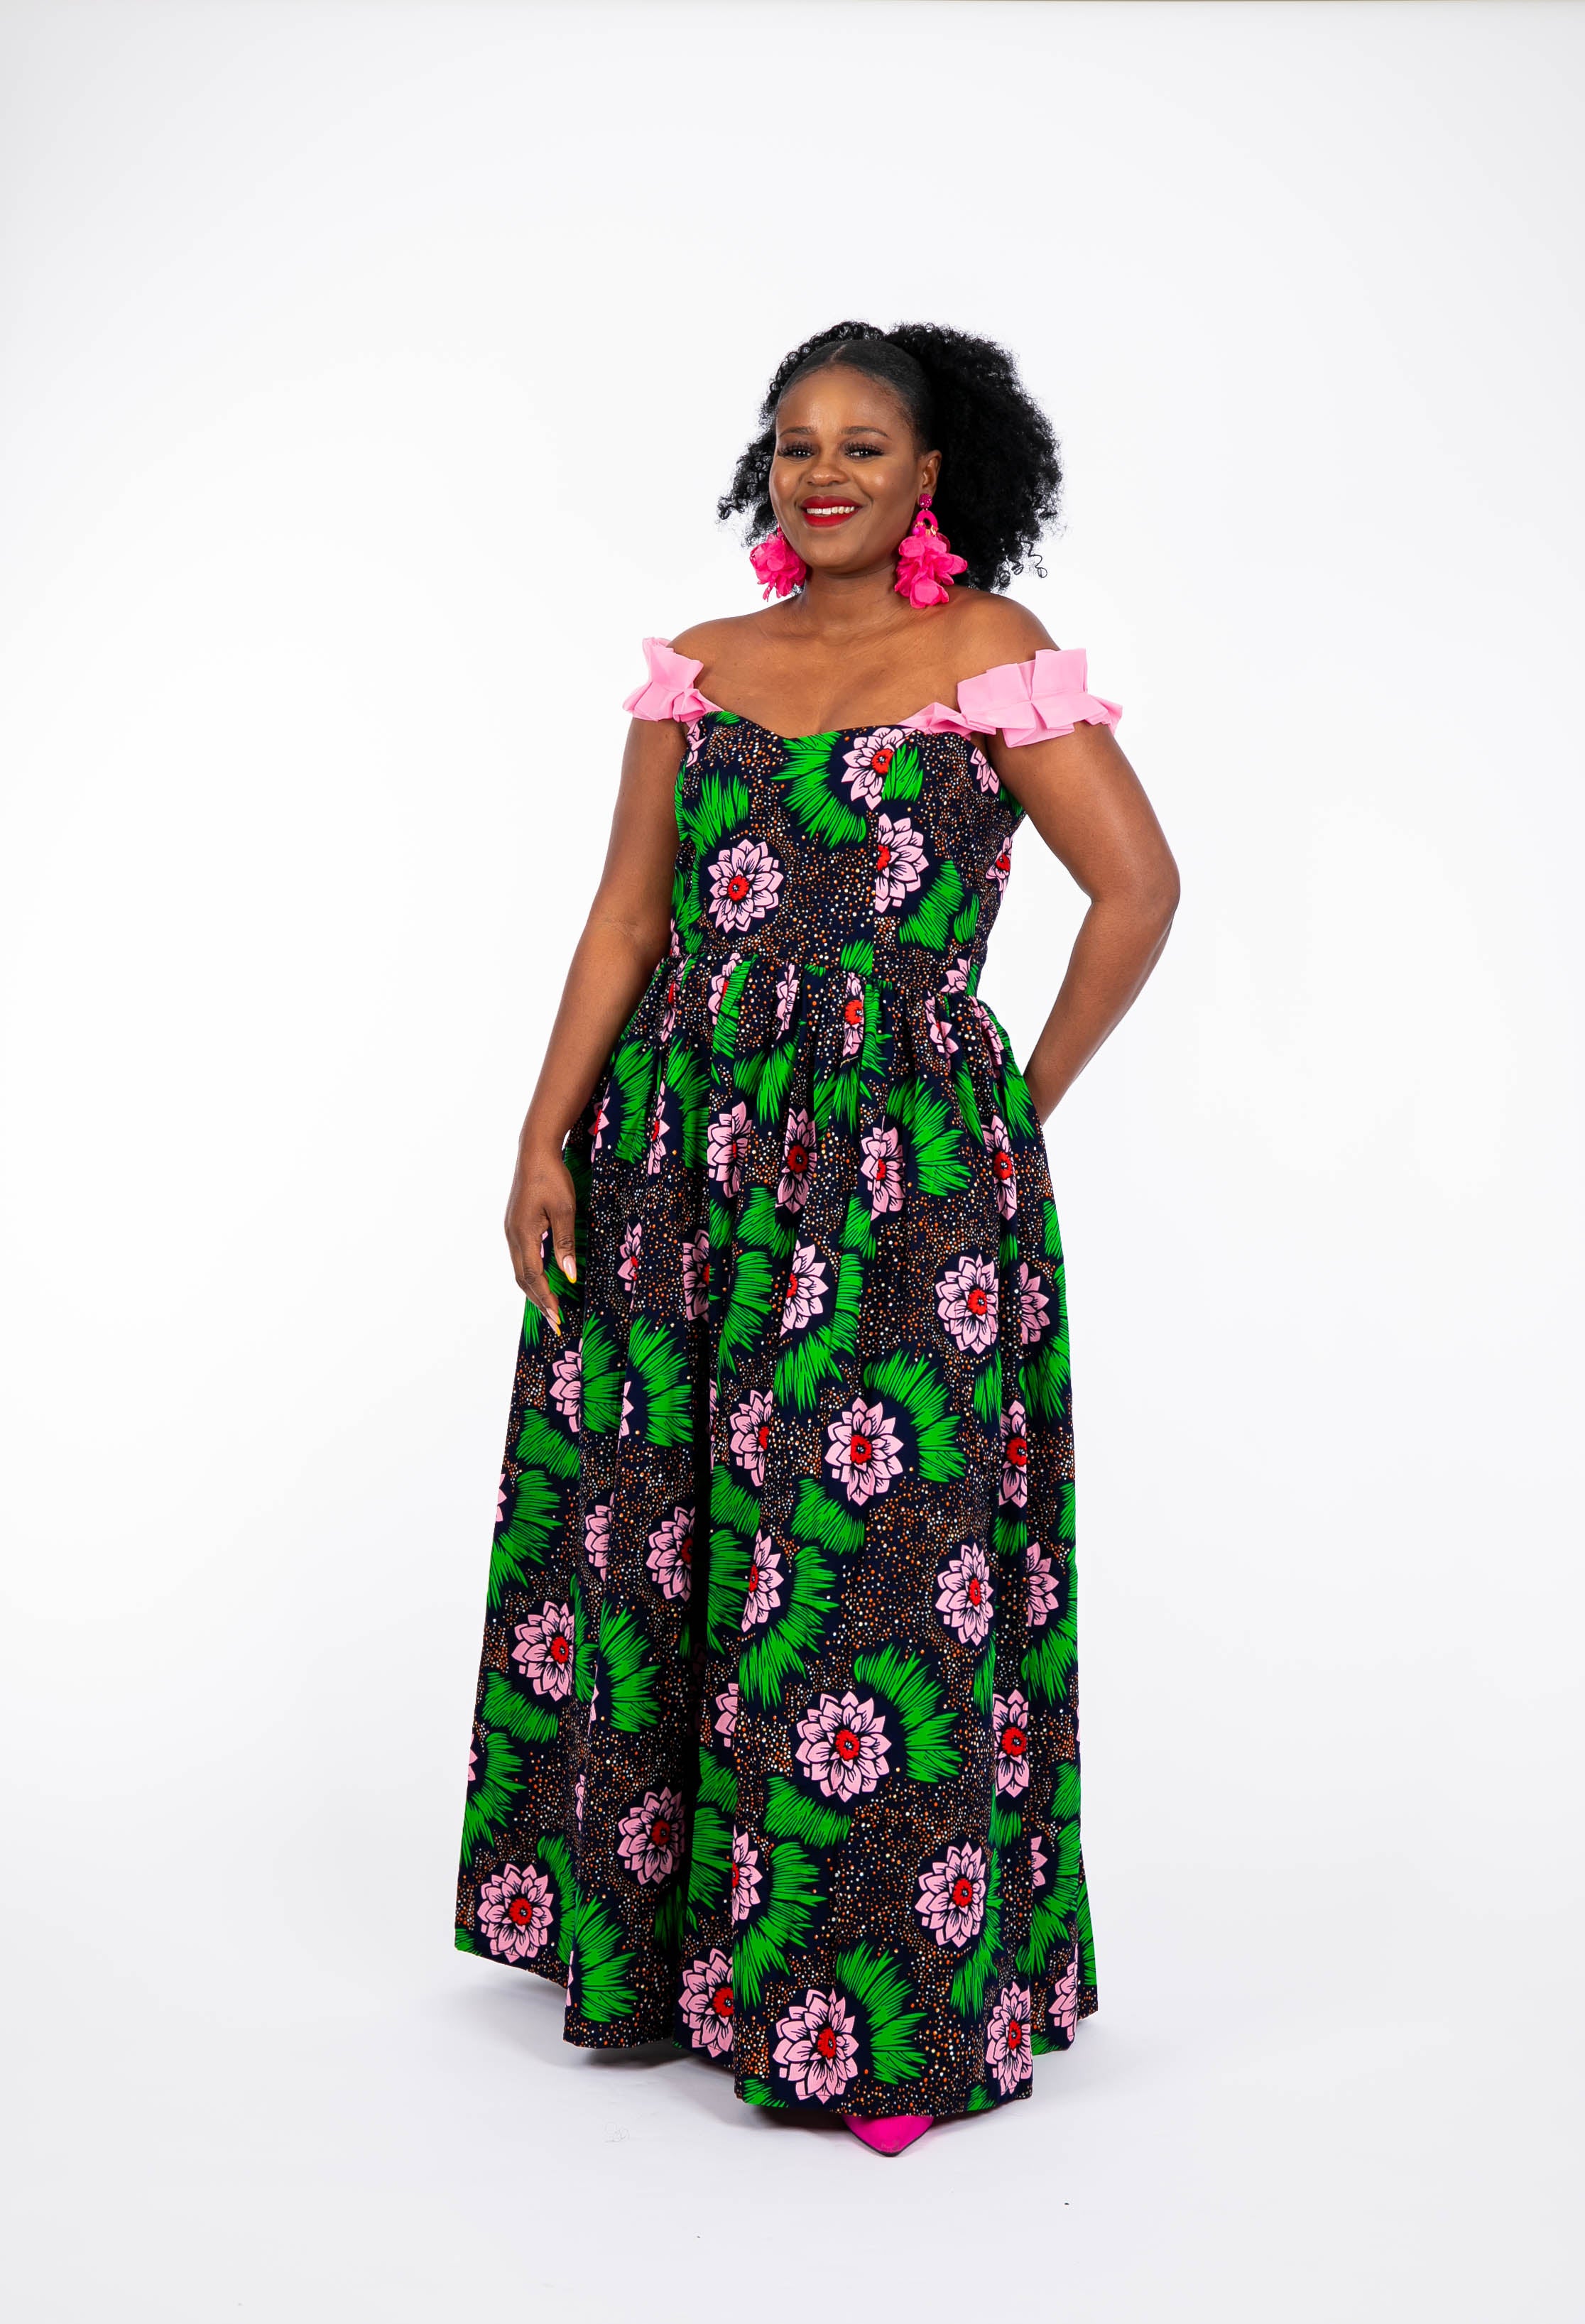 Temad collections  african print ankara Dulce maxi dress,Stylish African print dresses, Modern African dresses, Ankara dress for ladies, Latest Ankara dresses, Long Ankara dresses, ankara dresses Uk, Ankara dresses styles, stylish Ankara dresses, beautiful African dresses, African Ankara dresses for ladies, African dresses styles, ankara print, ankara maxi dresses,Ankara midi dresses, pink african print dresses, African print dress with pockets, Green african print maxi dress, African maxi dress 